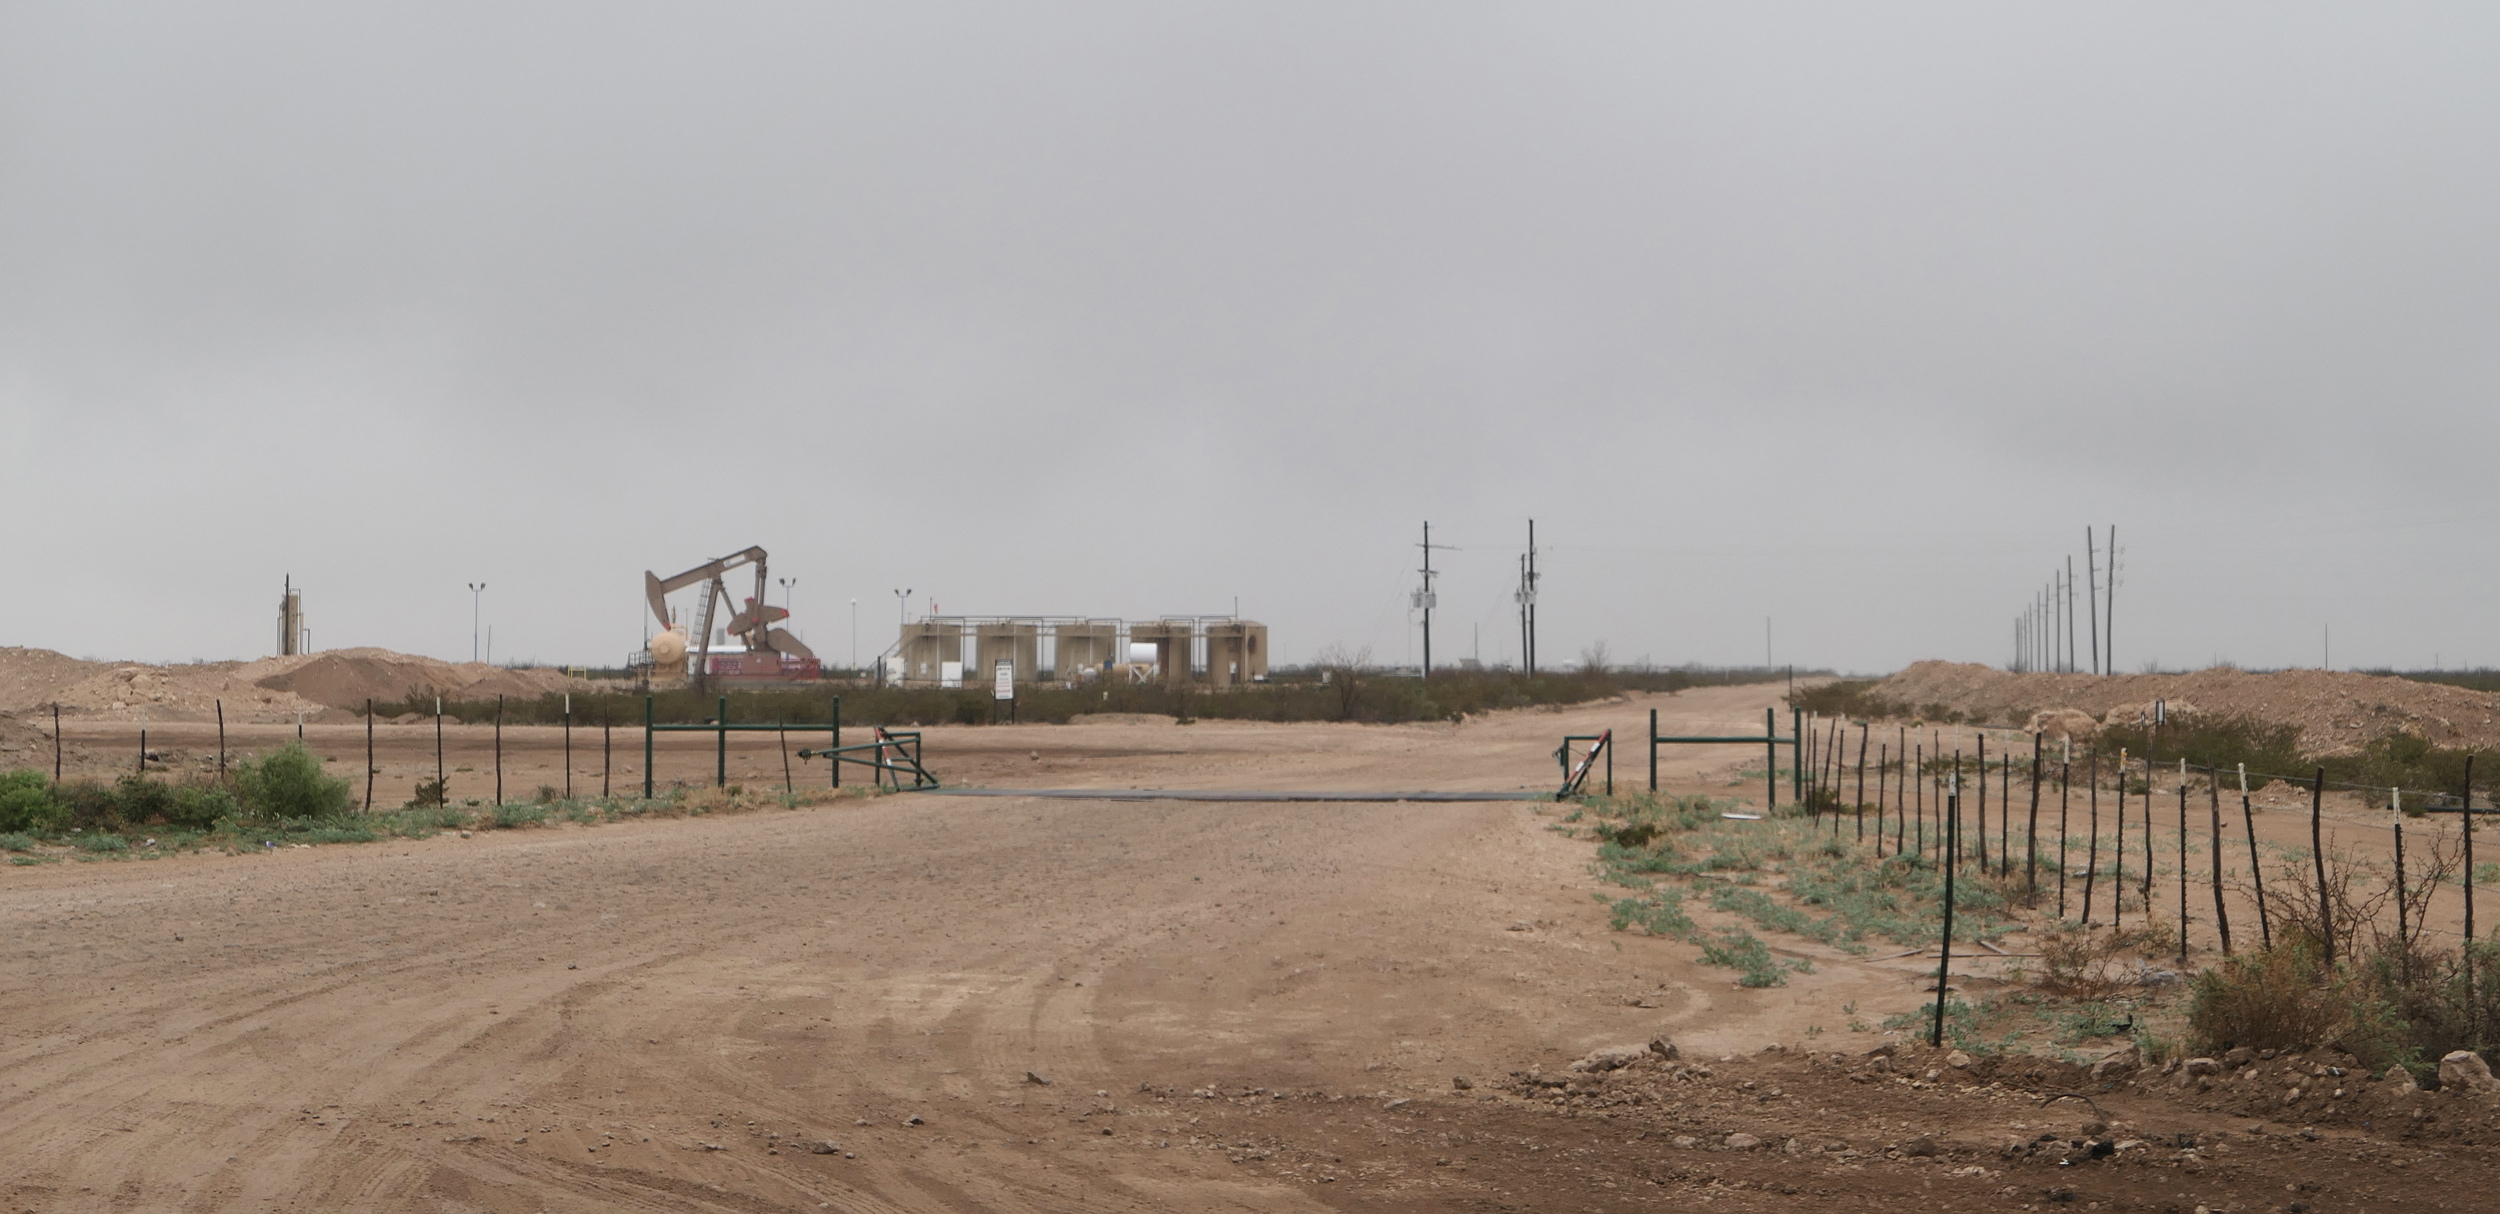 Drilling activity has encroached on the town of Pecos, Texas. These sites are near a residential neighborhood. Credit: Martha Pskowski/Inside Climate News